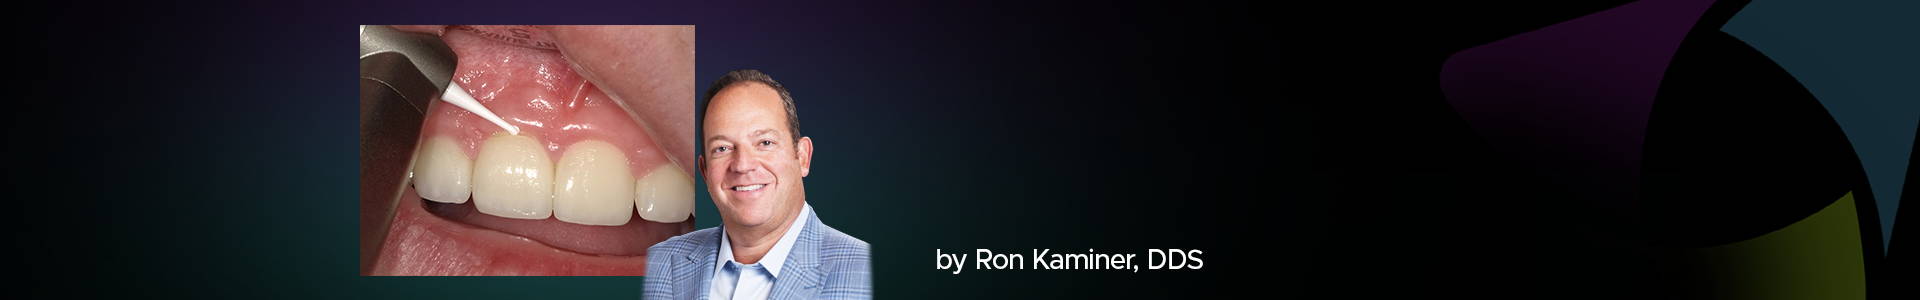 blog banner featuring Dr Ron Kaminer and a clinical image in the back